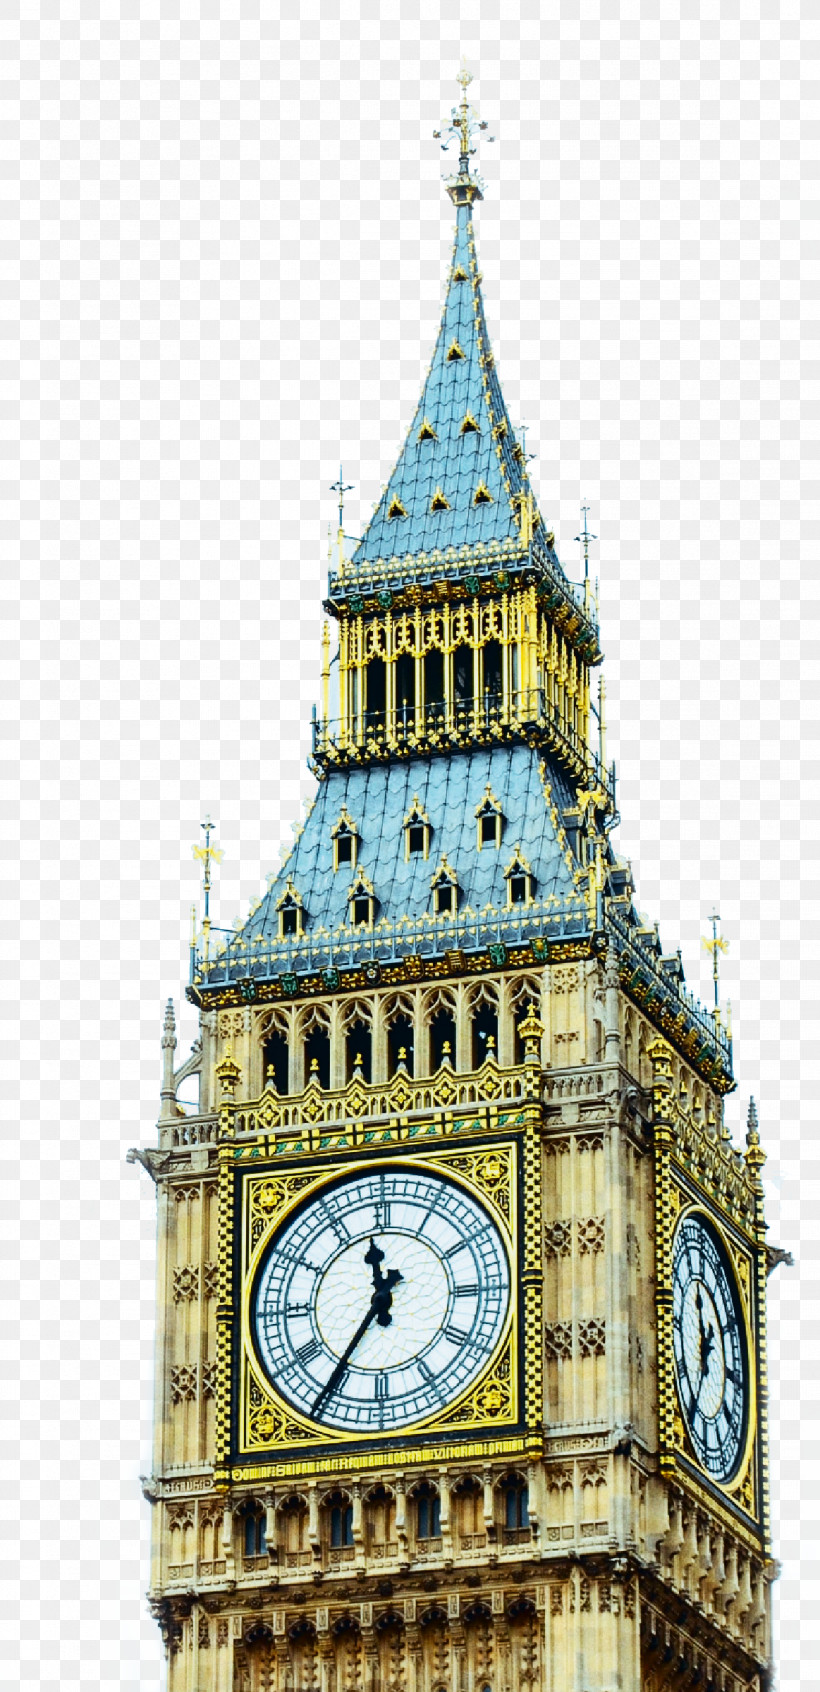 Clock Tower Landmark Tower Clock Architecture, PNG, 1163x2400px, Clock Tower, Architecture, Bell Tower, Building, Classical Architecture Download Free